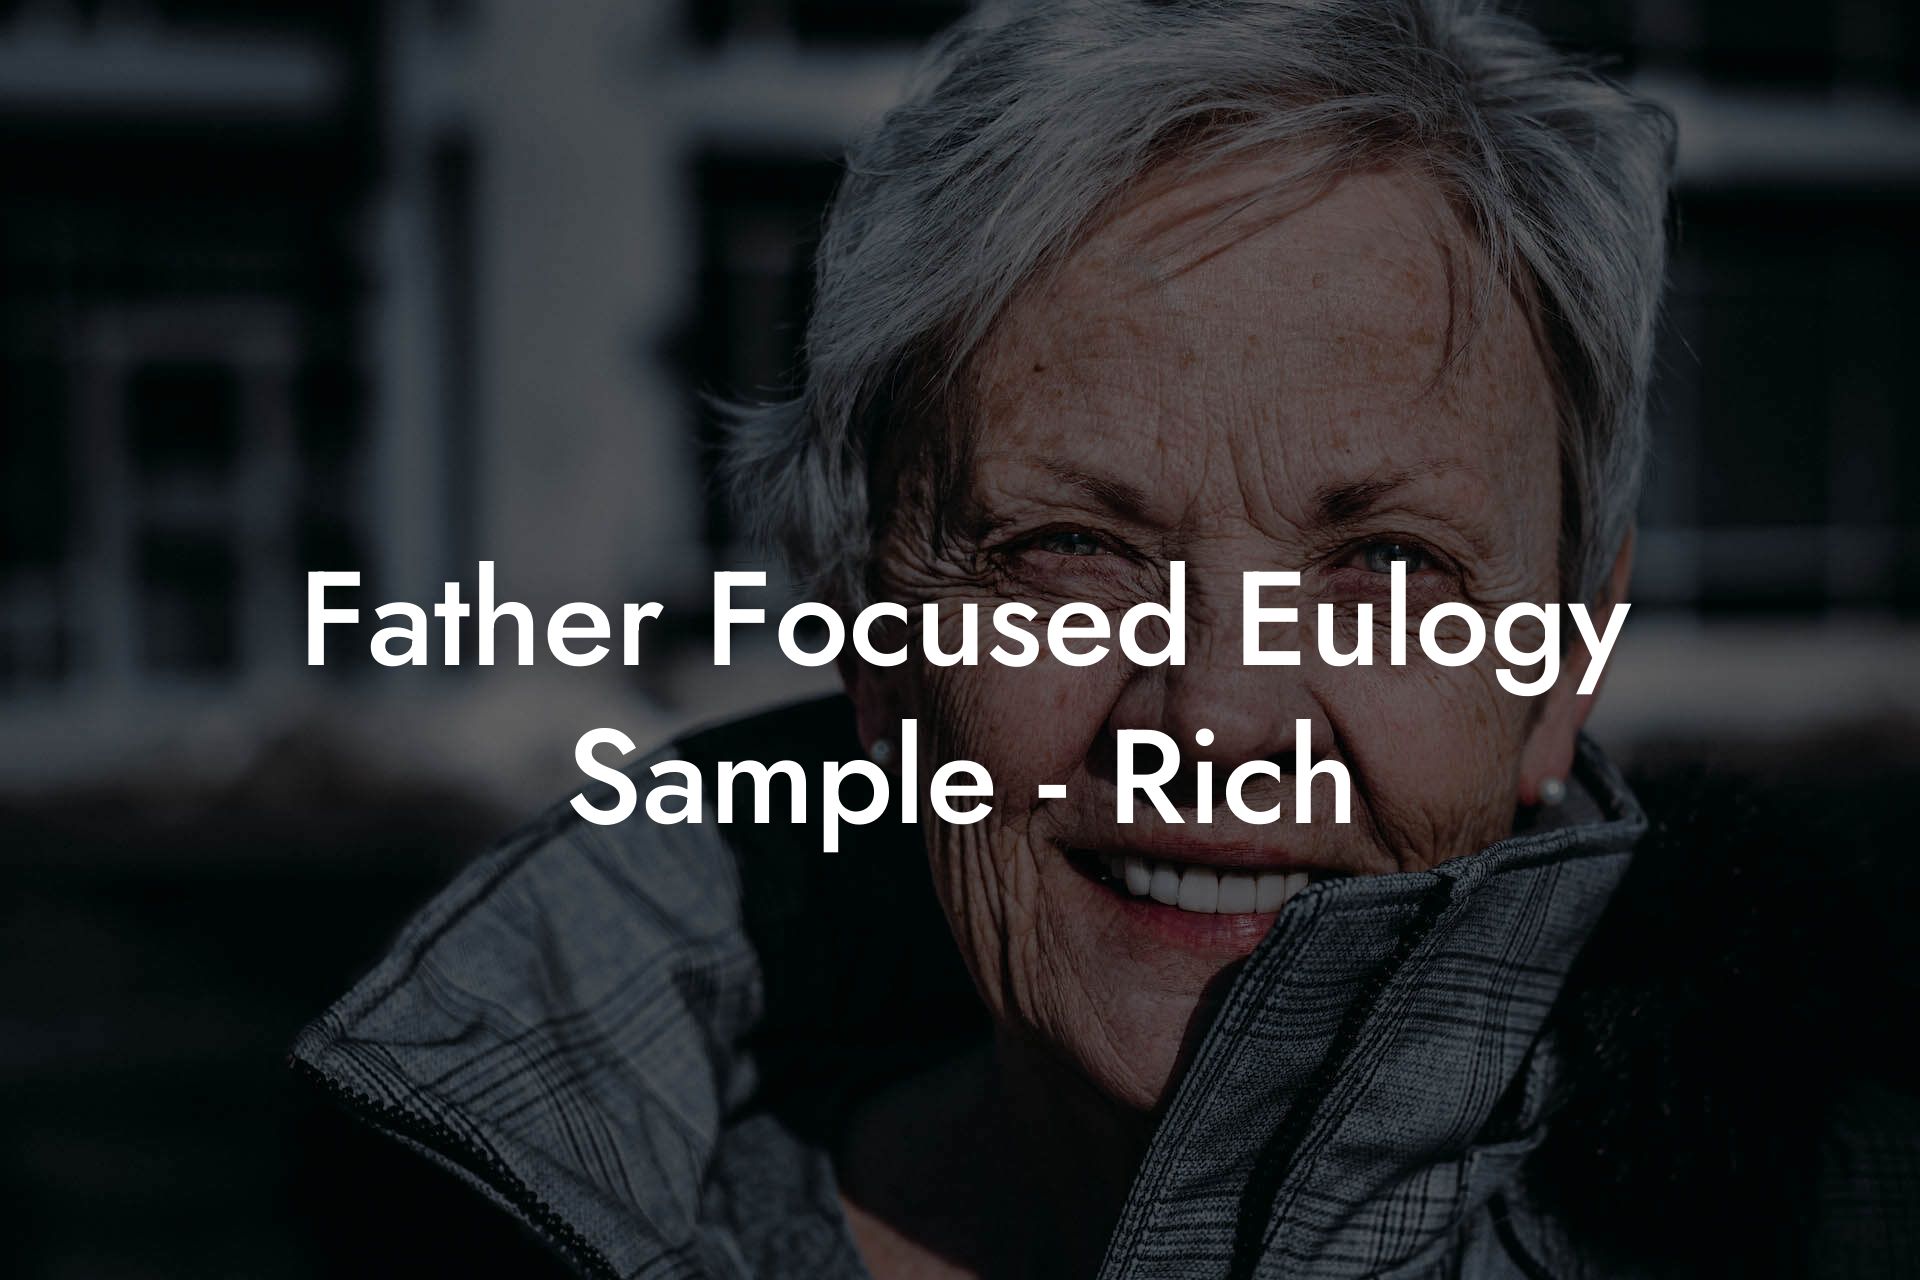 Father Focused Eulogy Sample - Rich